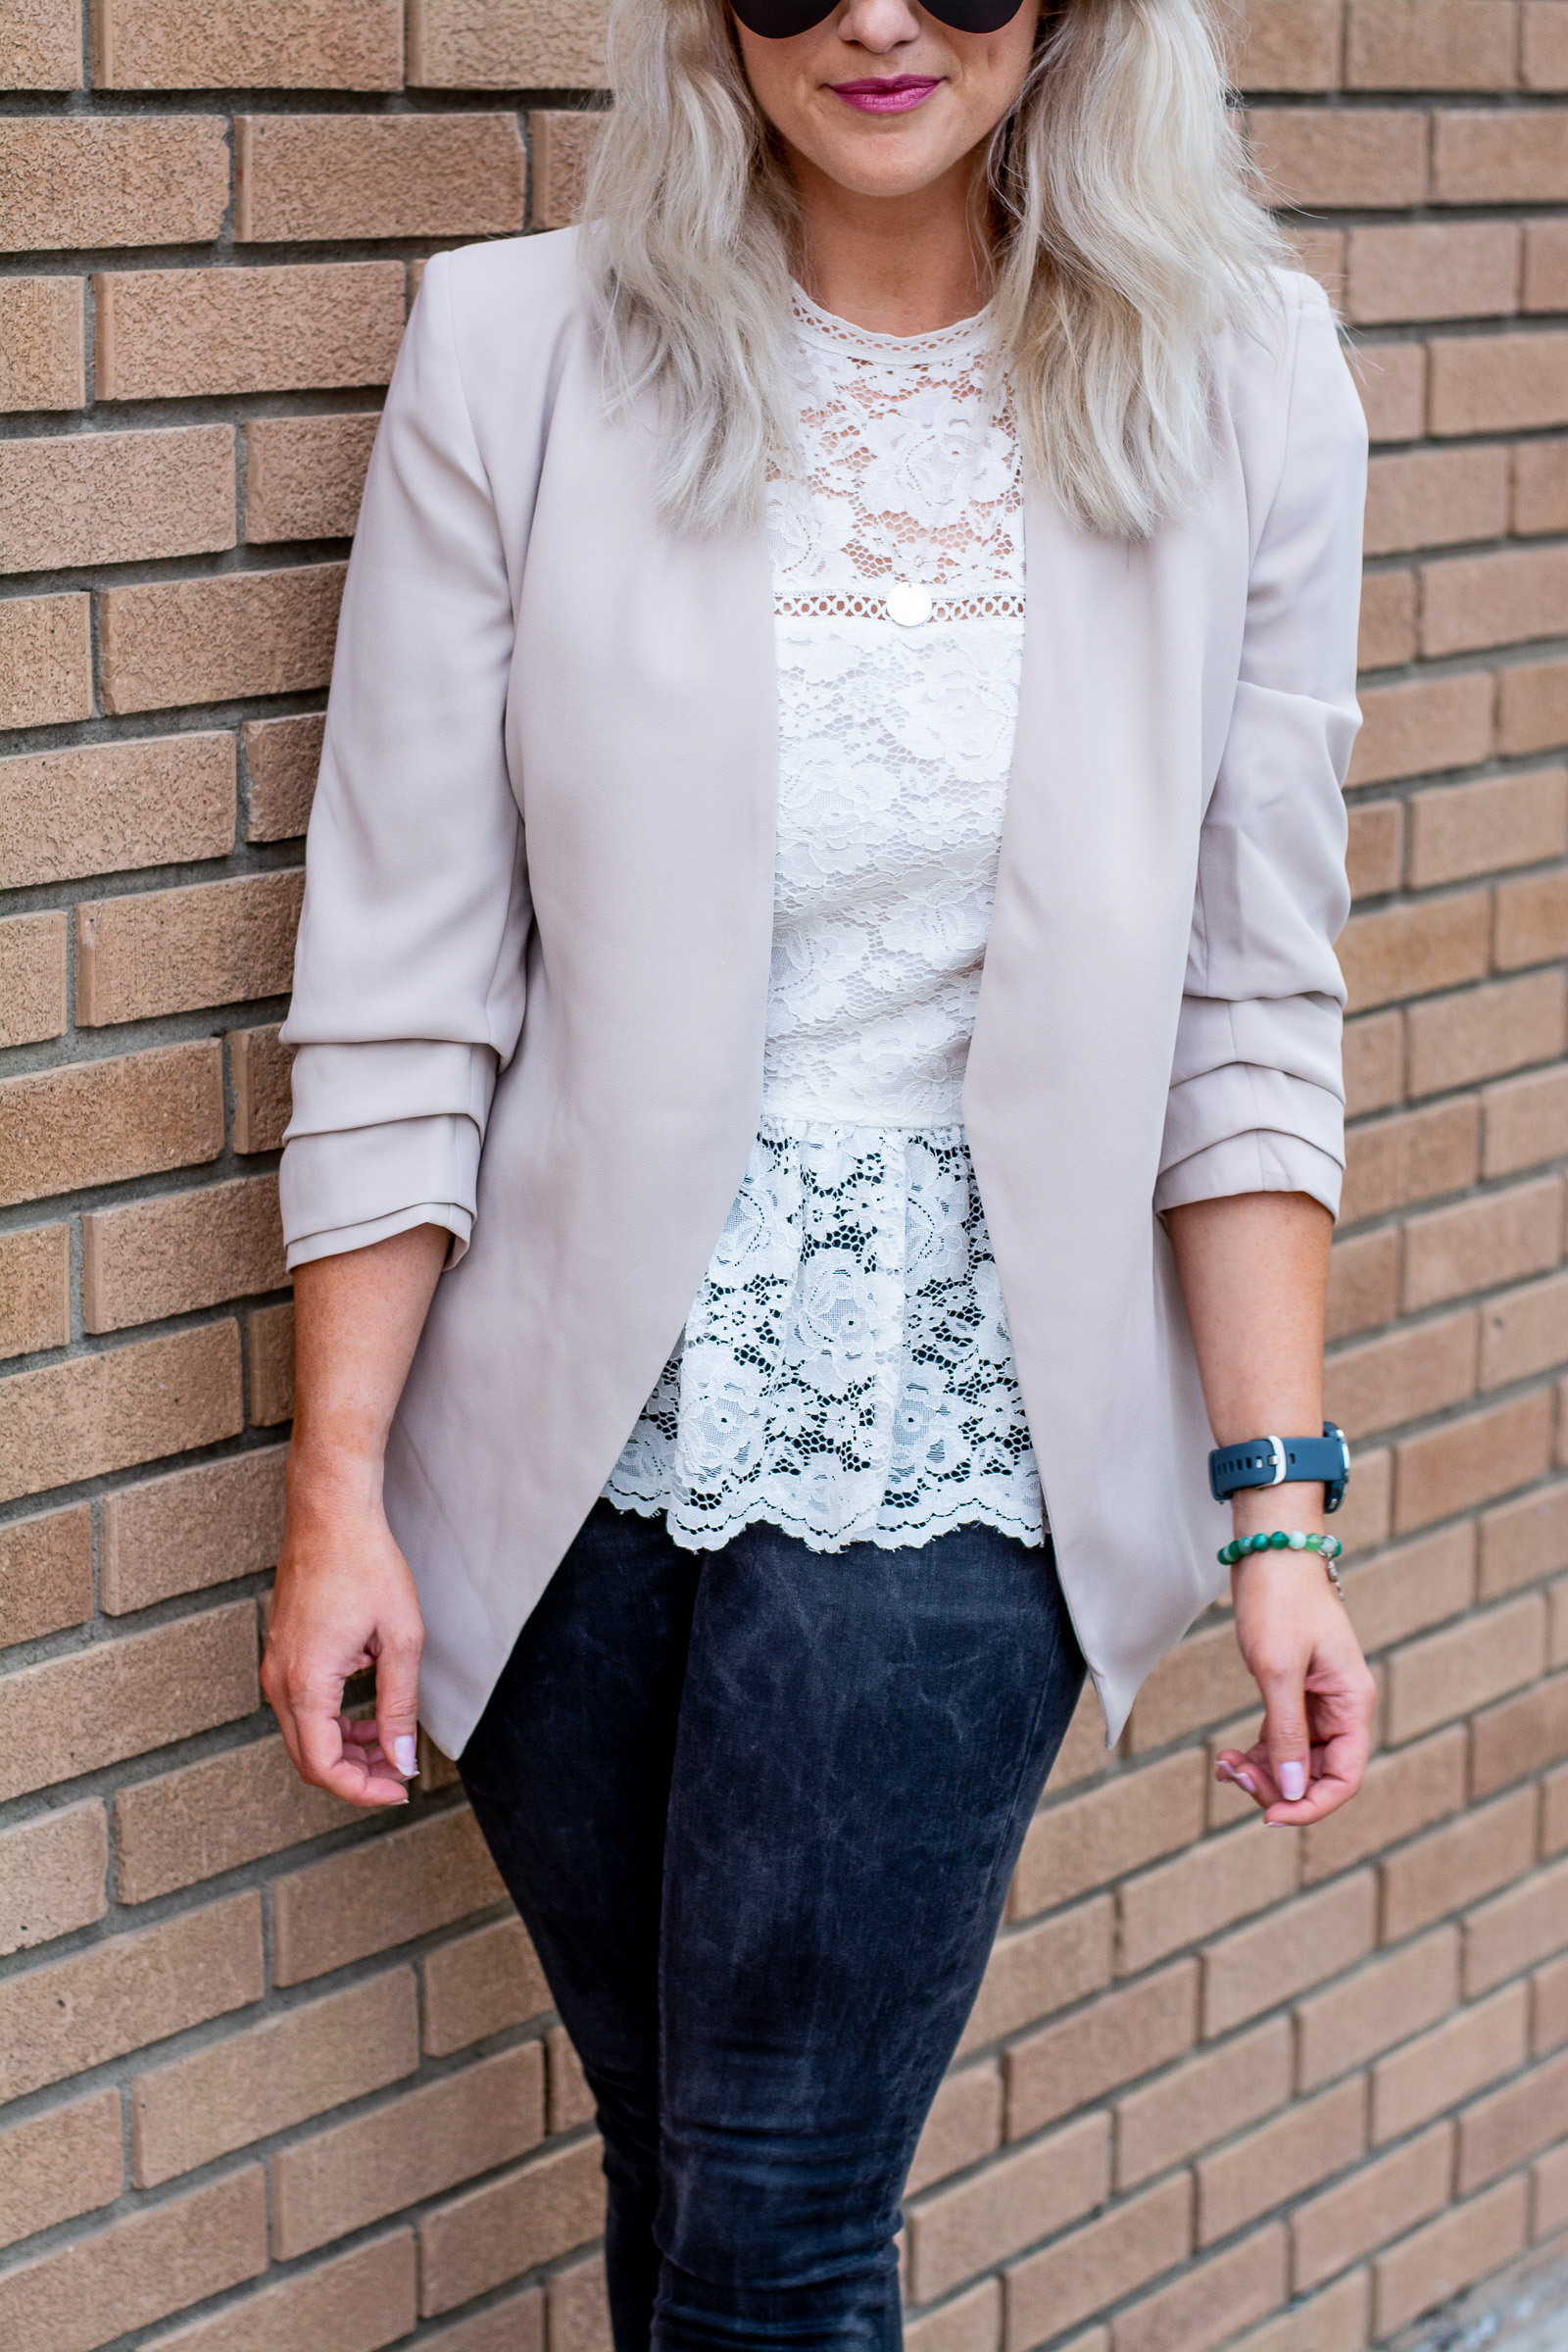 Chic Neutral Street Style. | LSR